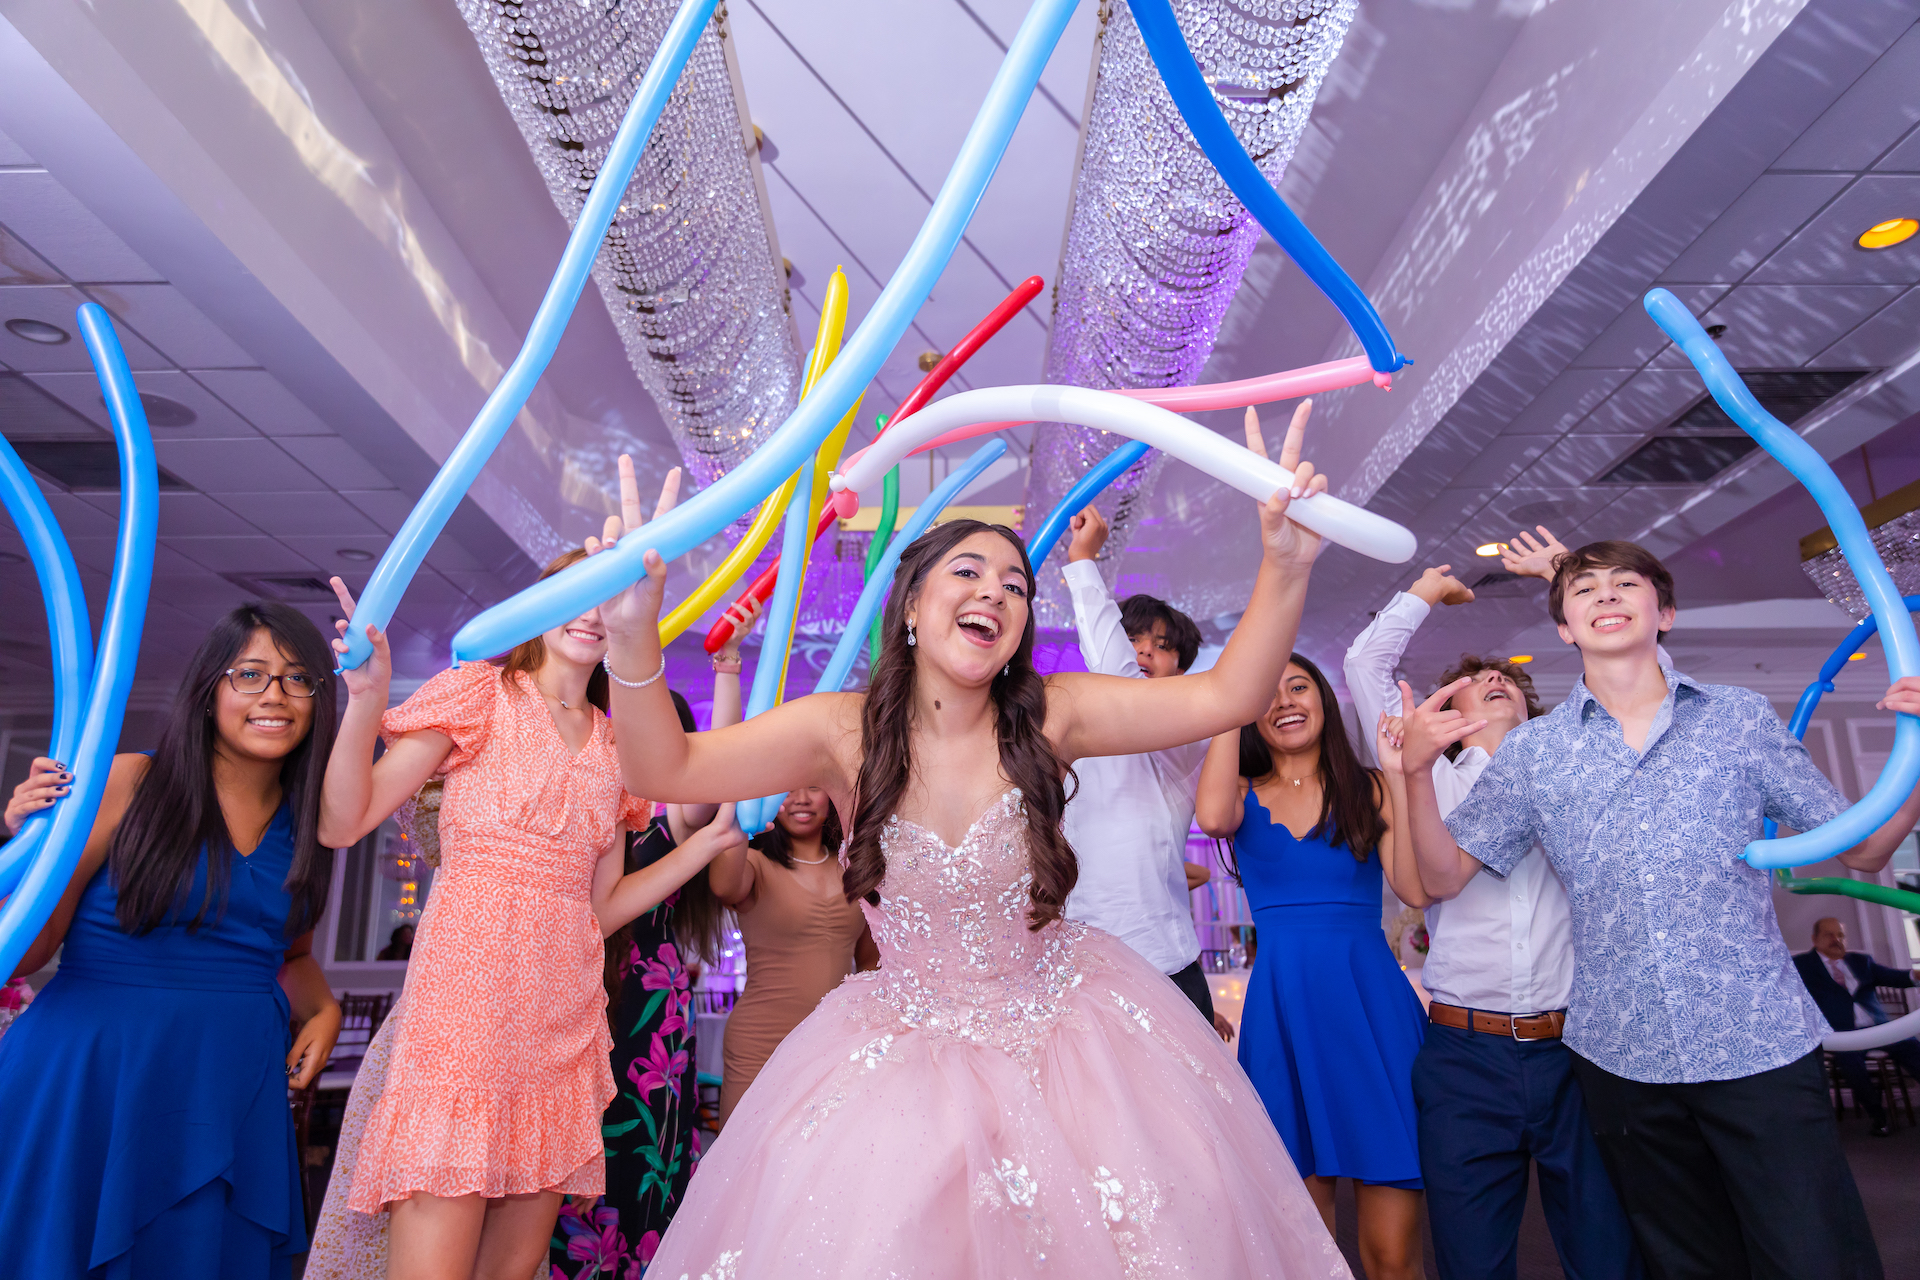 Quinceanera at her party celebrating with friends